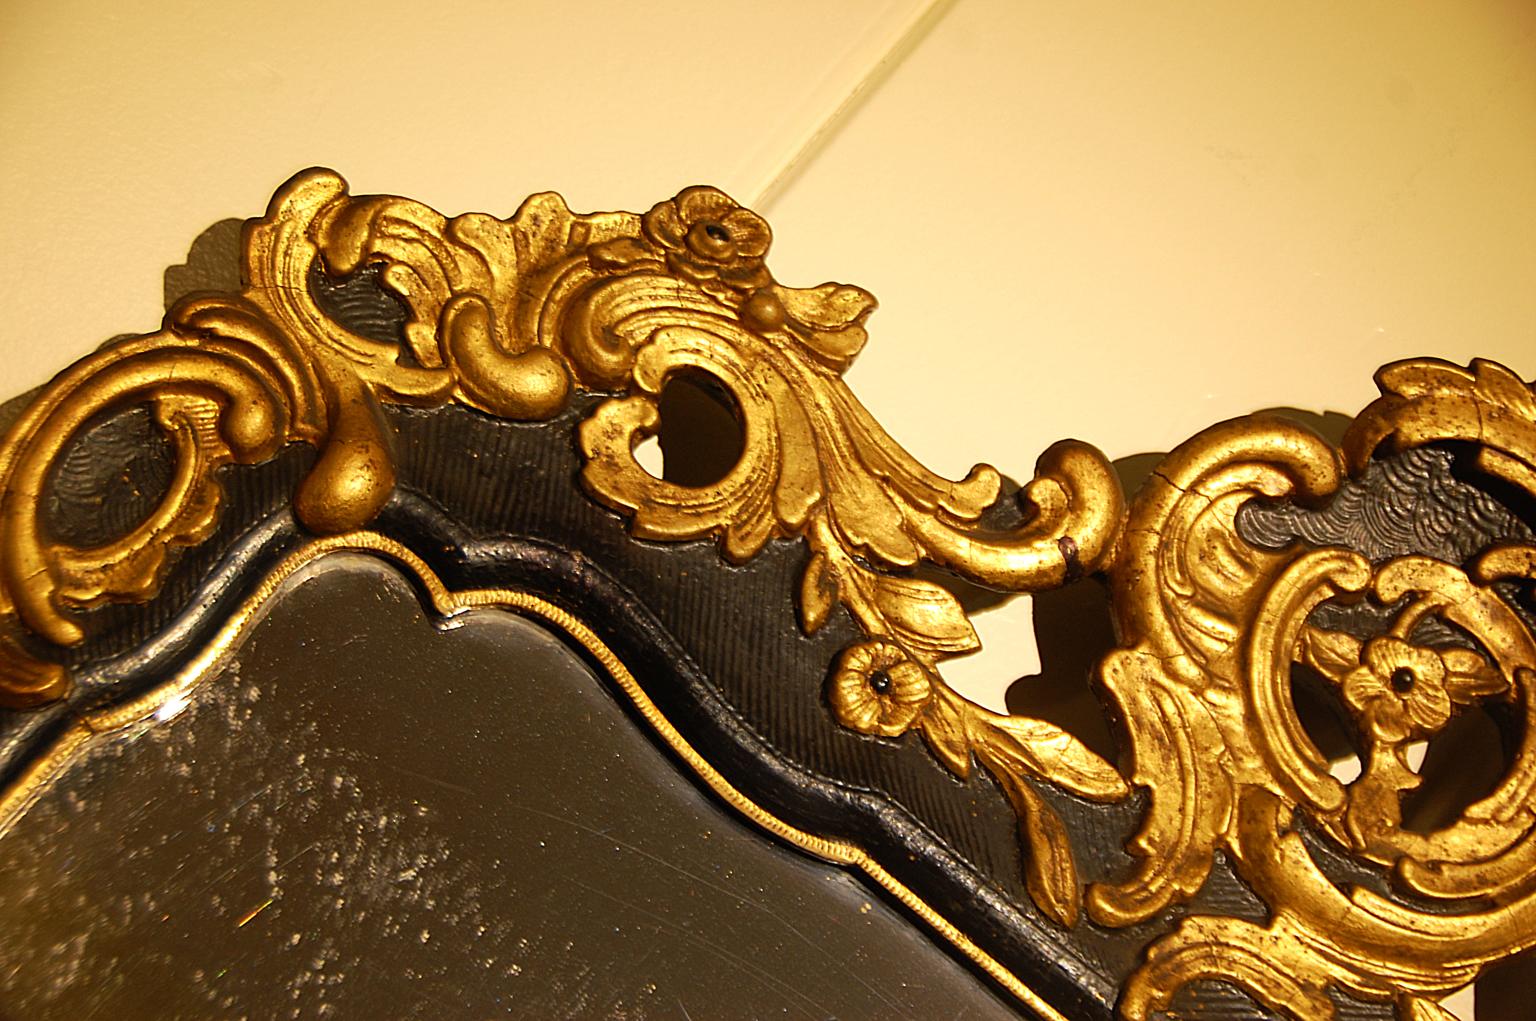 Continental hand carved late 18th-early 19th century parcel-gilt mirror. This elegant mirror has enhanced the leaf, shell and flower carvings by highlighting them in gold while keeping
the background simply shallowly carved and stained in black.